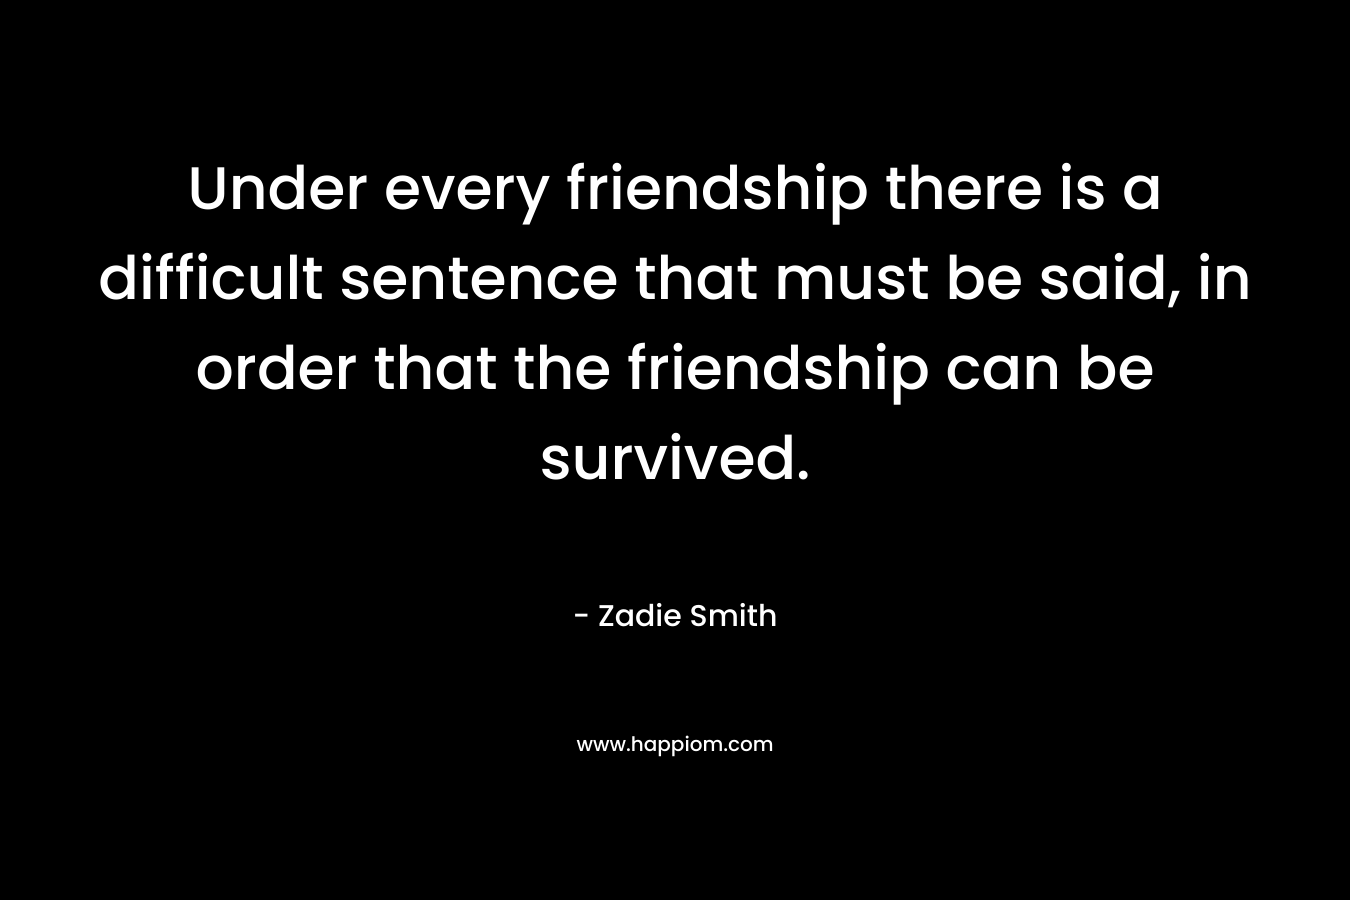 Under every friendship there is a difficult sentence that must be said, in order that the friendship can be survived.